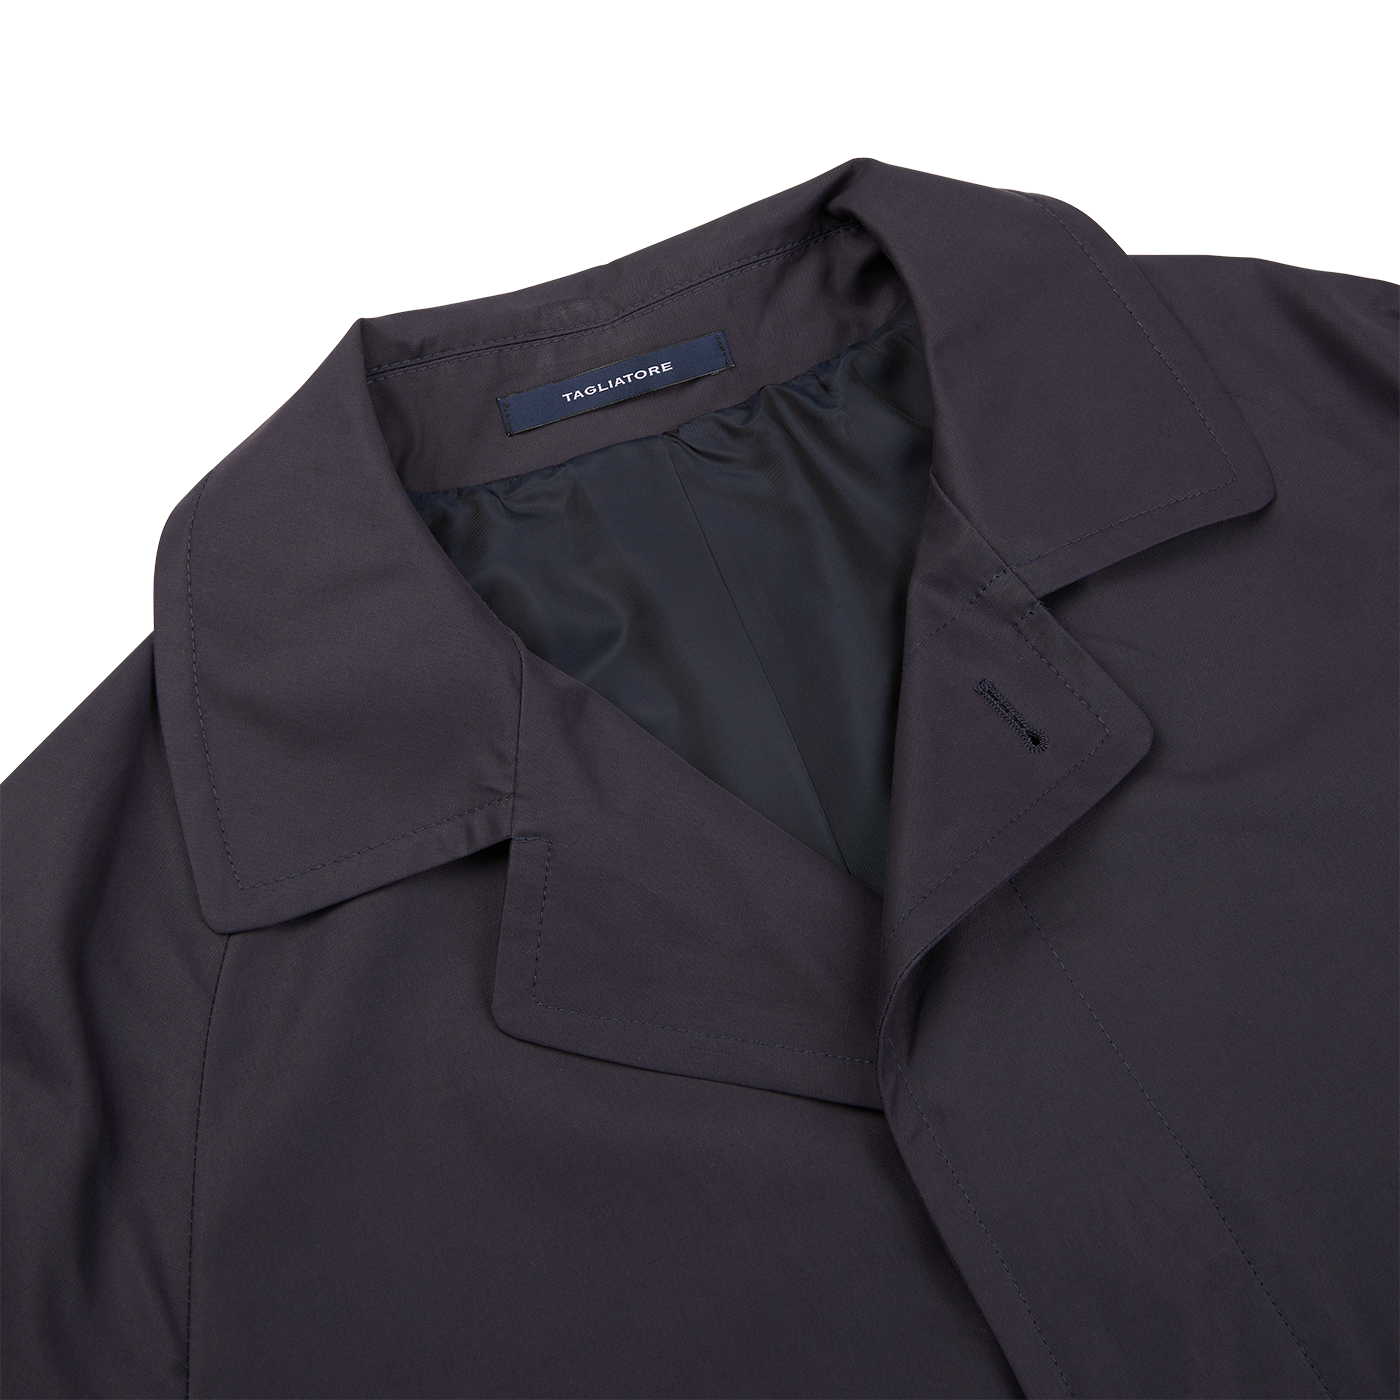 A Tagliatore navy blue cotton nylon trench coat with a slim fit and black collar.